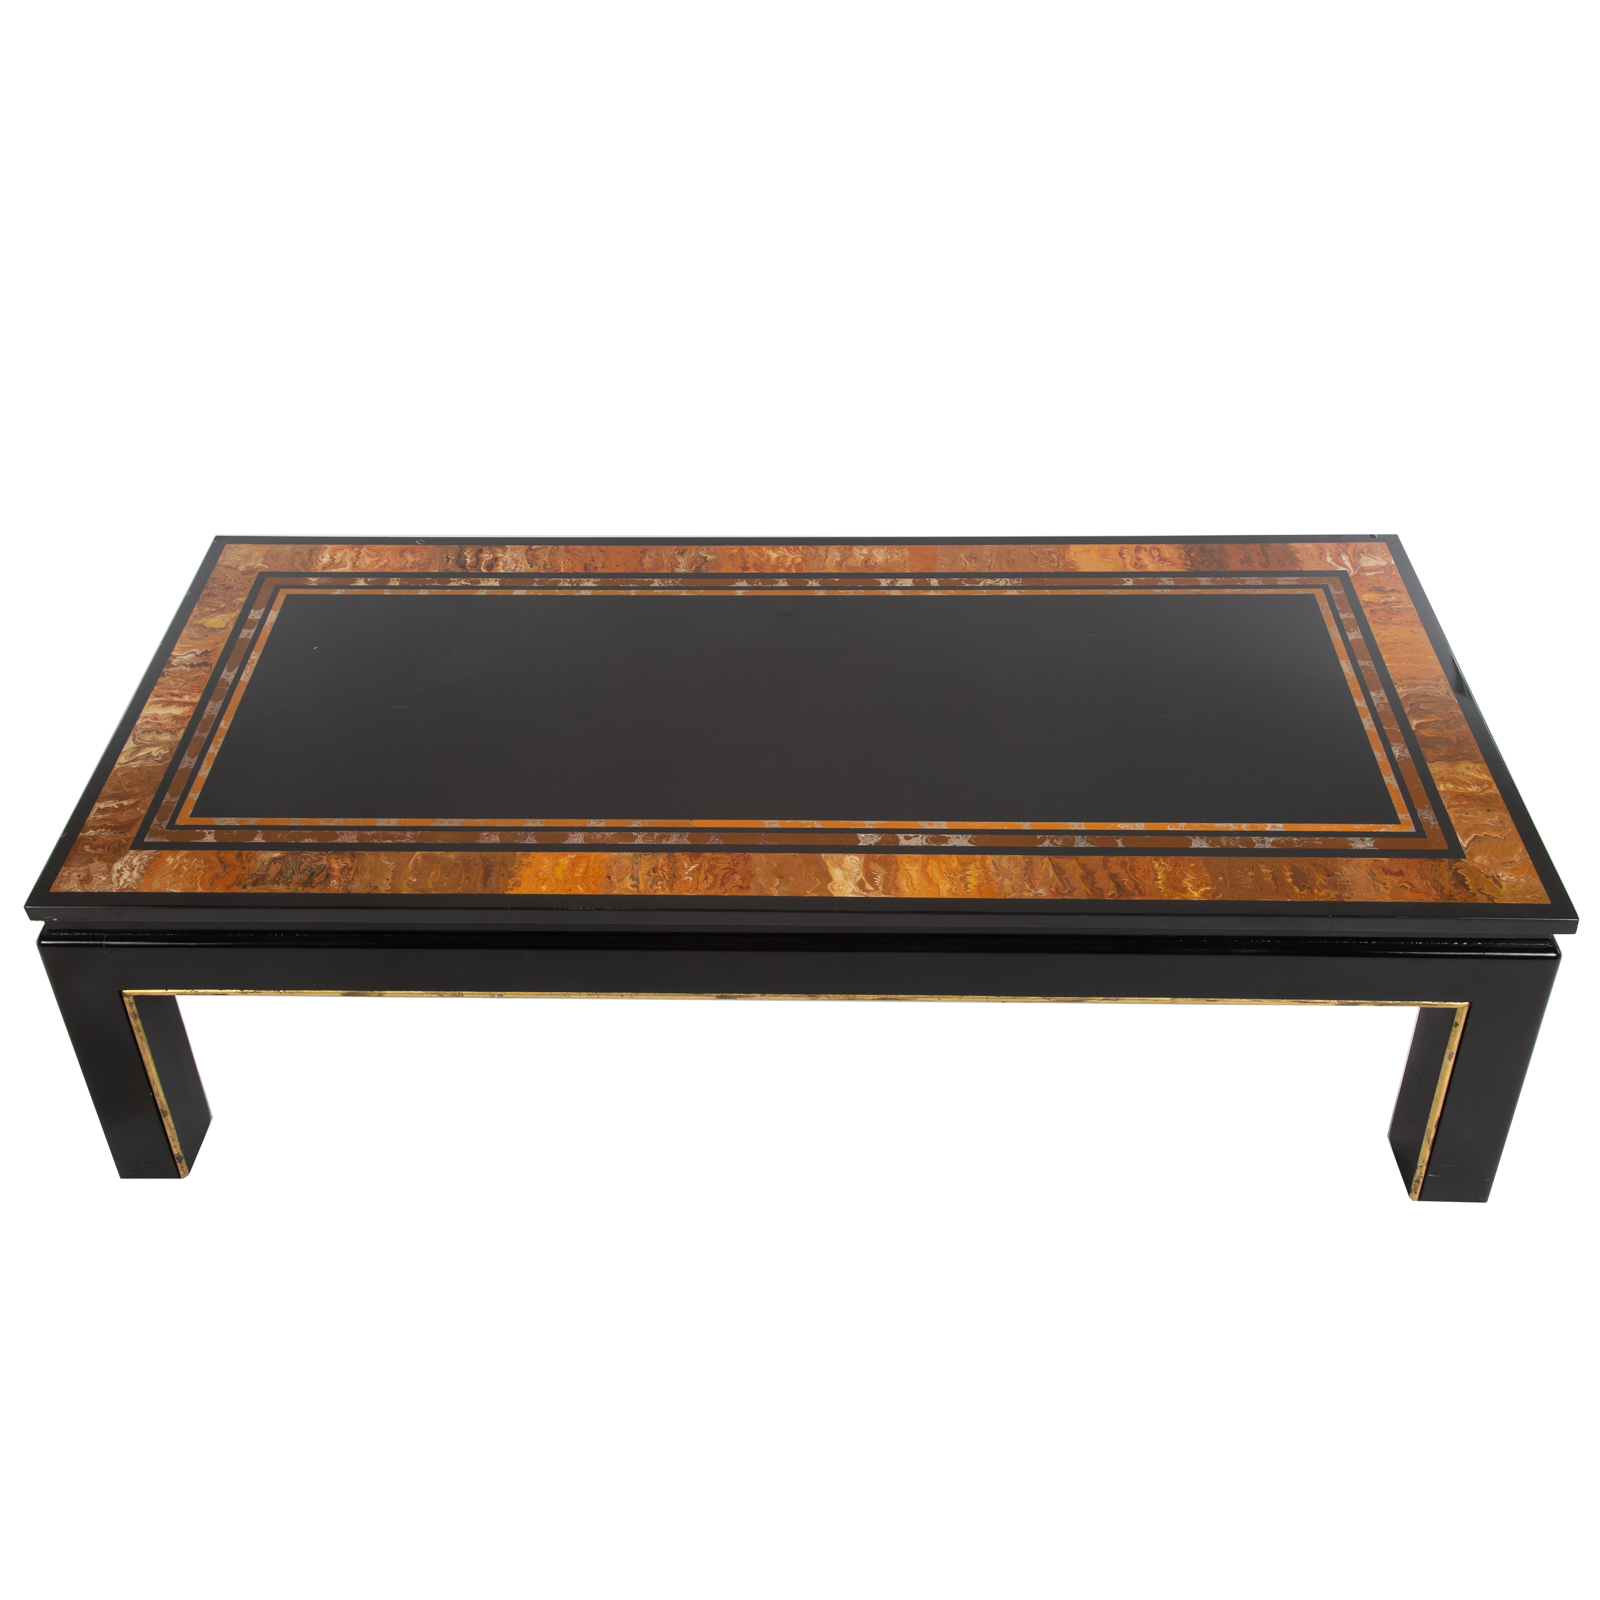 CHINOISERIE LACQUERED COFFEE TABLE 3b29cf